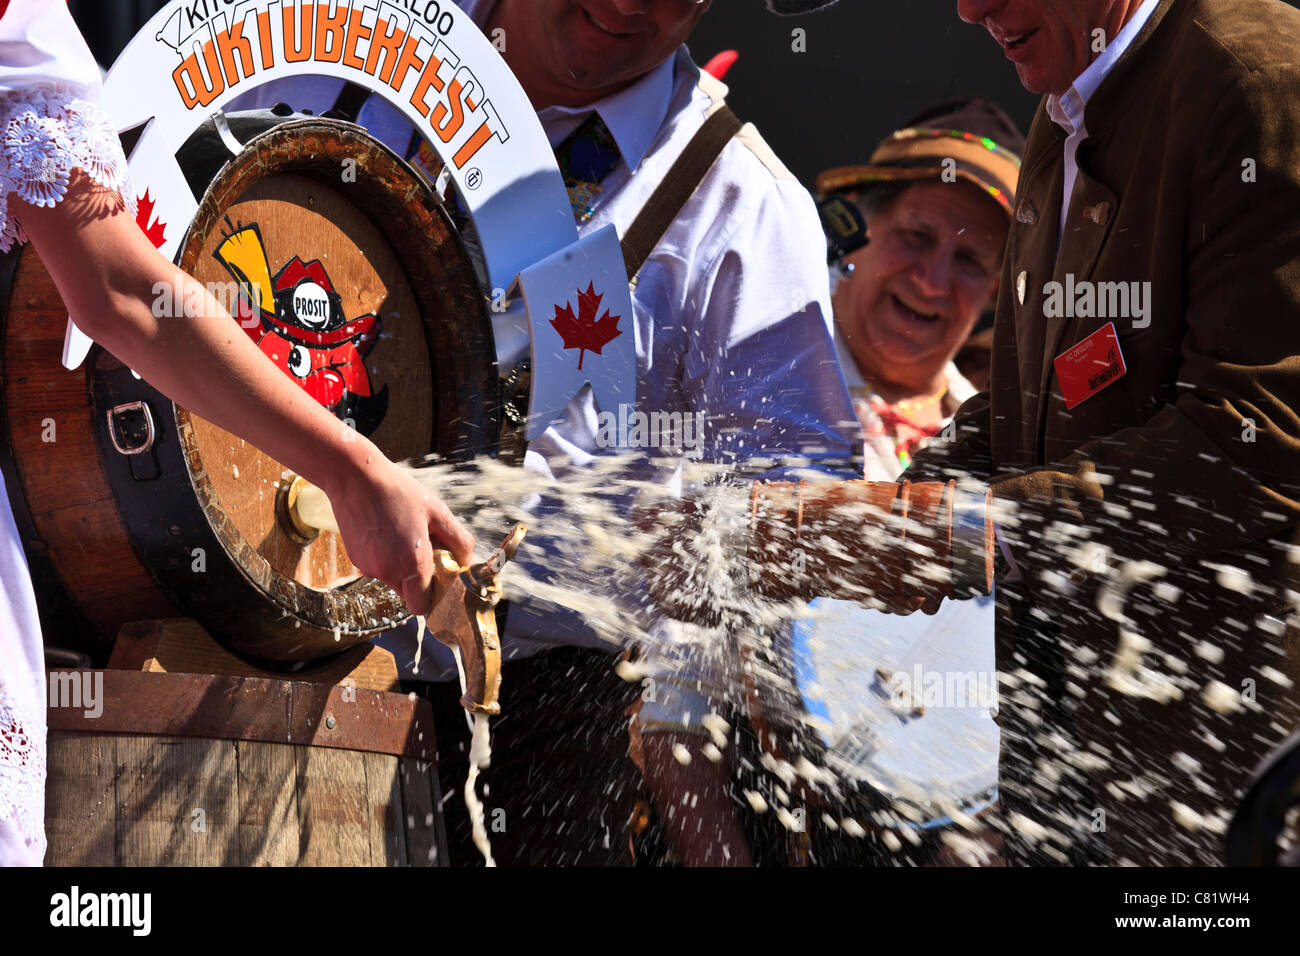 Tapping the first beer barrel Oktoberfest 2011 Kitchener Canada Stock Photo